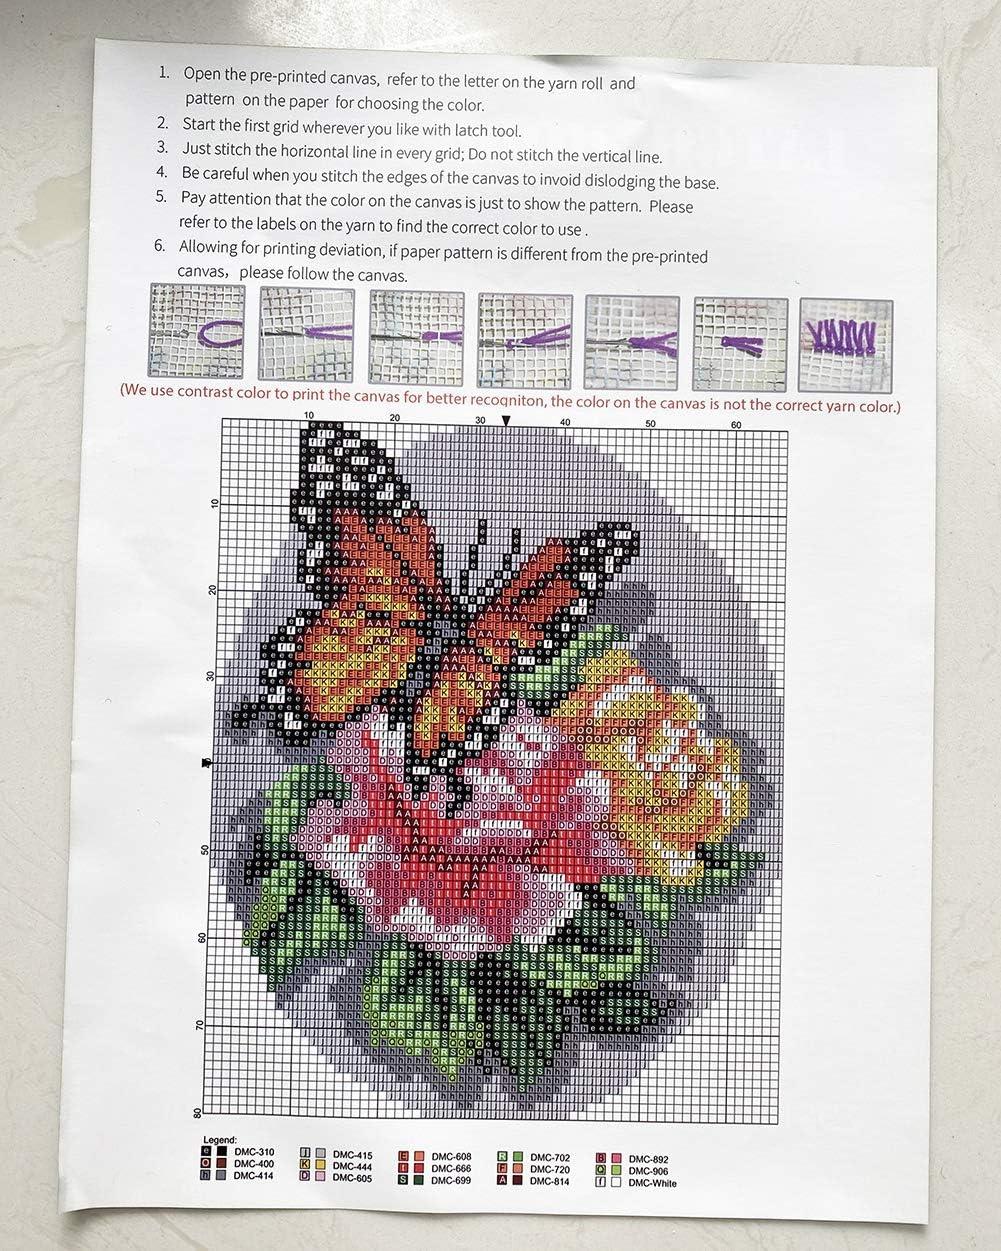 MeetBSelf Latch Hook Rug Kit Floral Butterfly 20.4X20.4 in